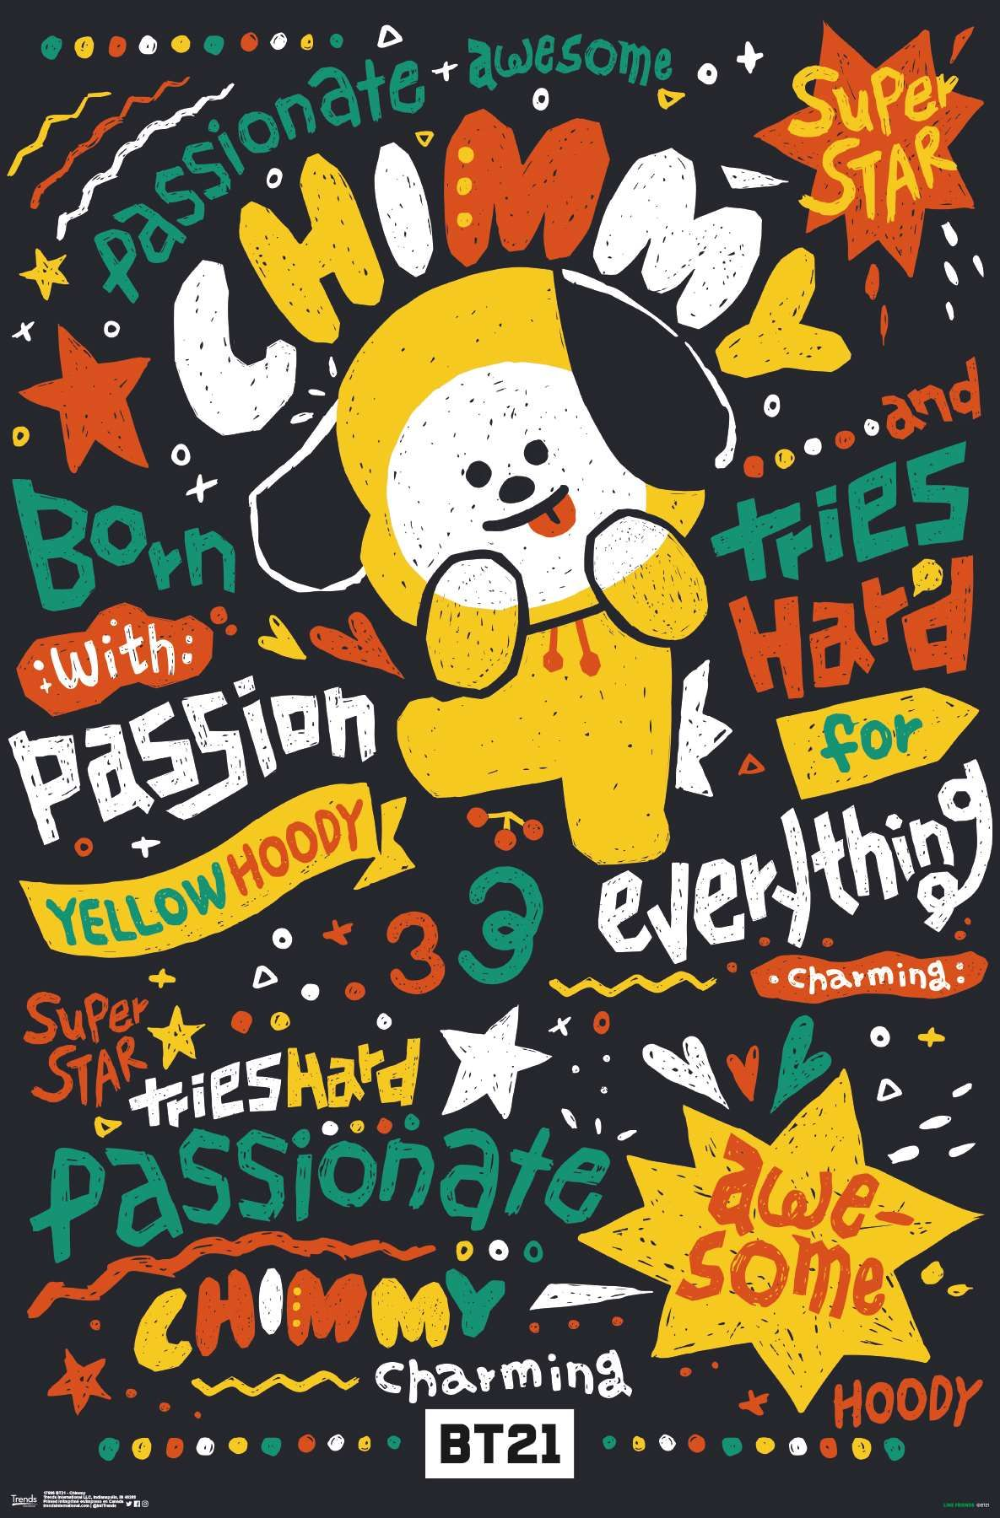 Chimmy Pictures Wallpapers